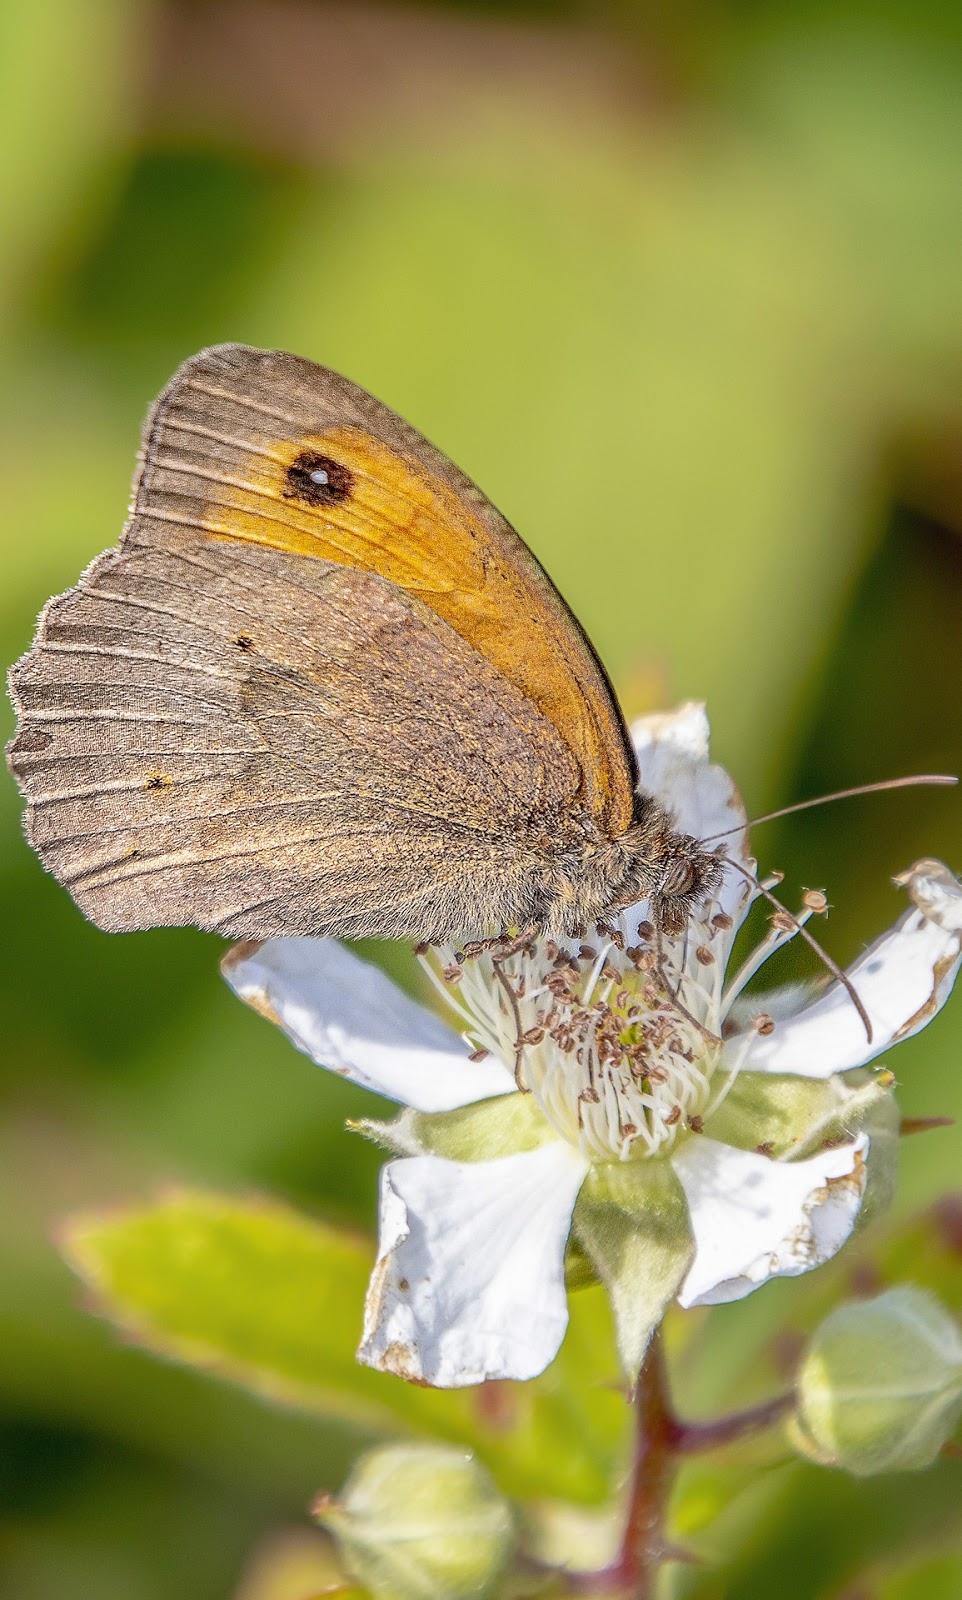 A meadow brown butterfly.